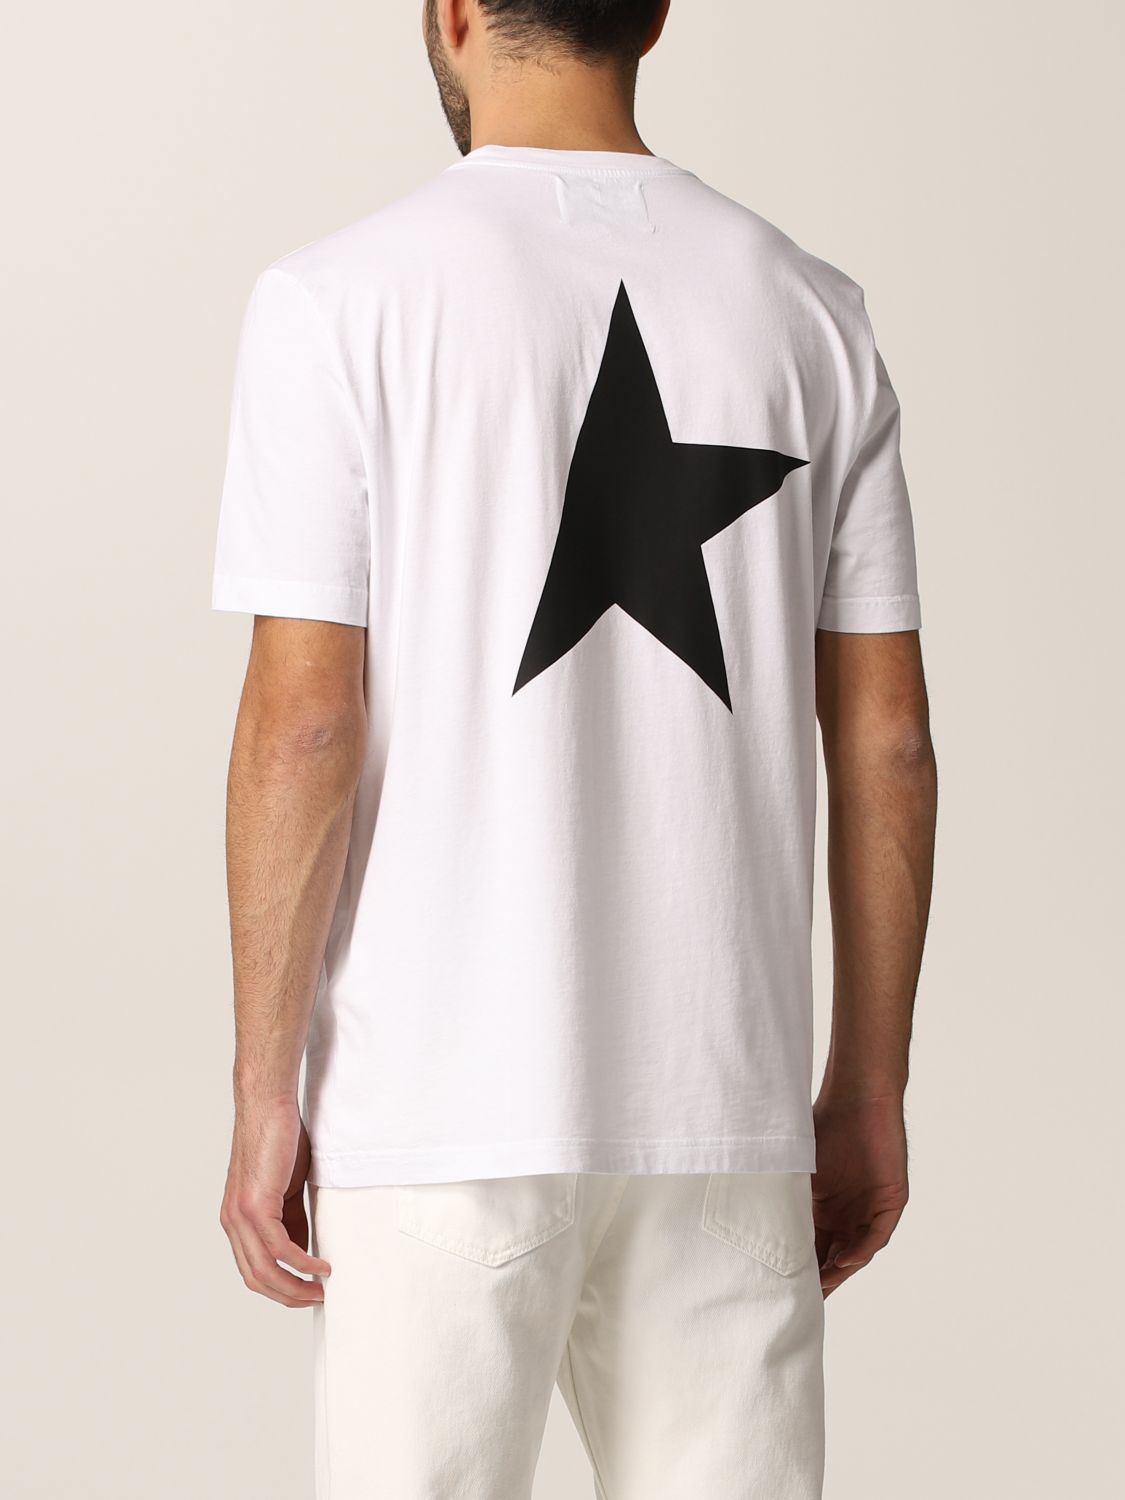 GOOSE: Star cotton t-shirt - White Golden Goose t-shirt GMP01056P00059310283 on GIGLIO.COM